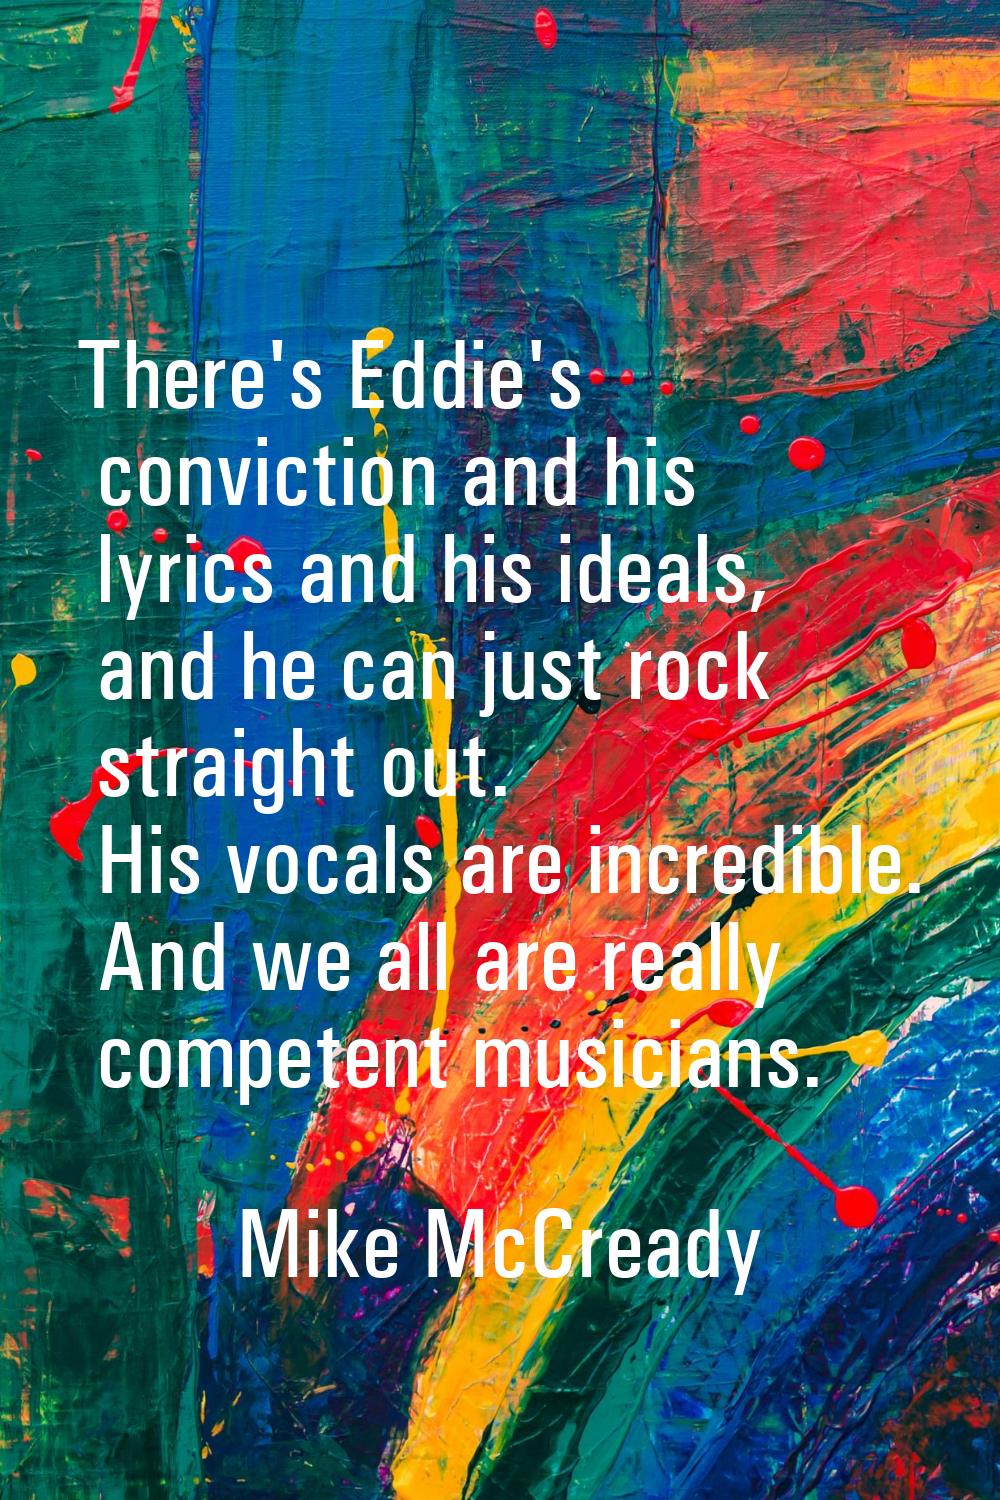 There's Eddie's conviction and his lyrics and his ideals, and he can just rock straight out. His vo